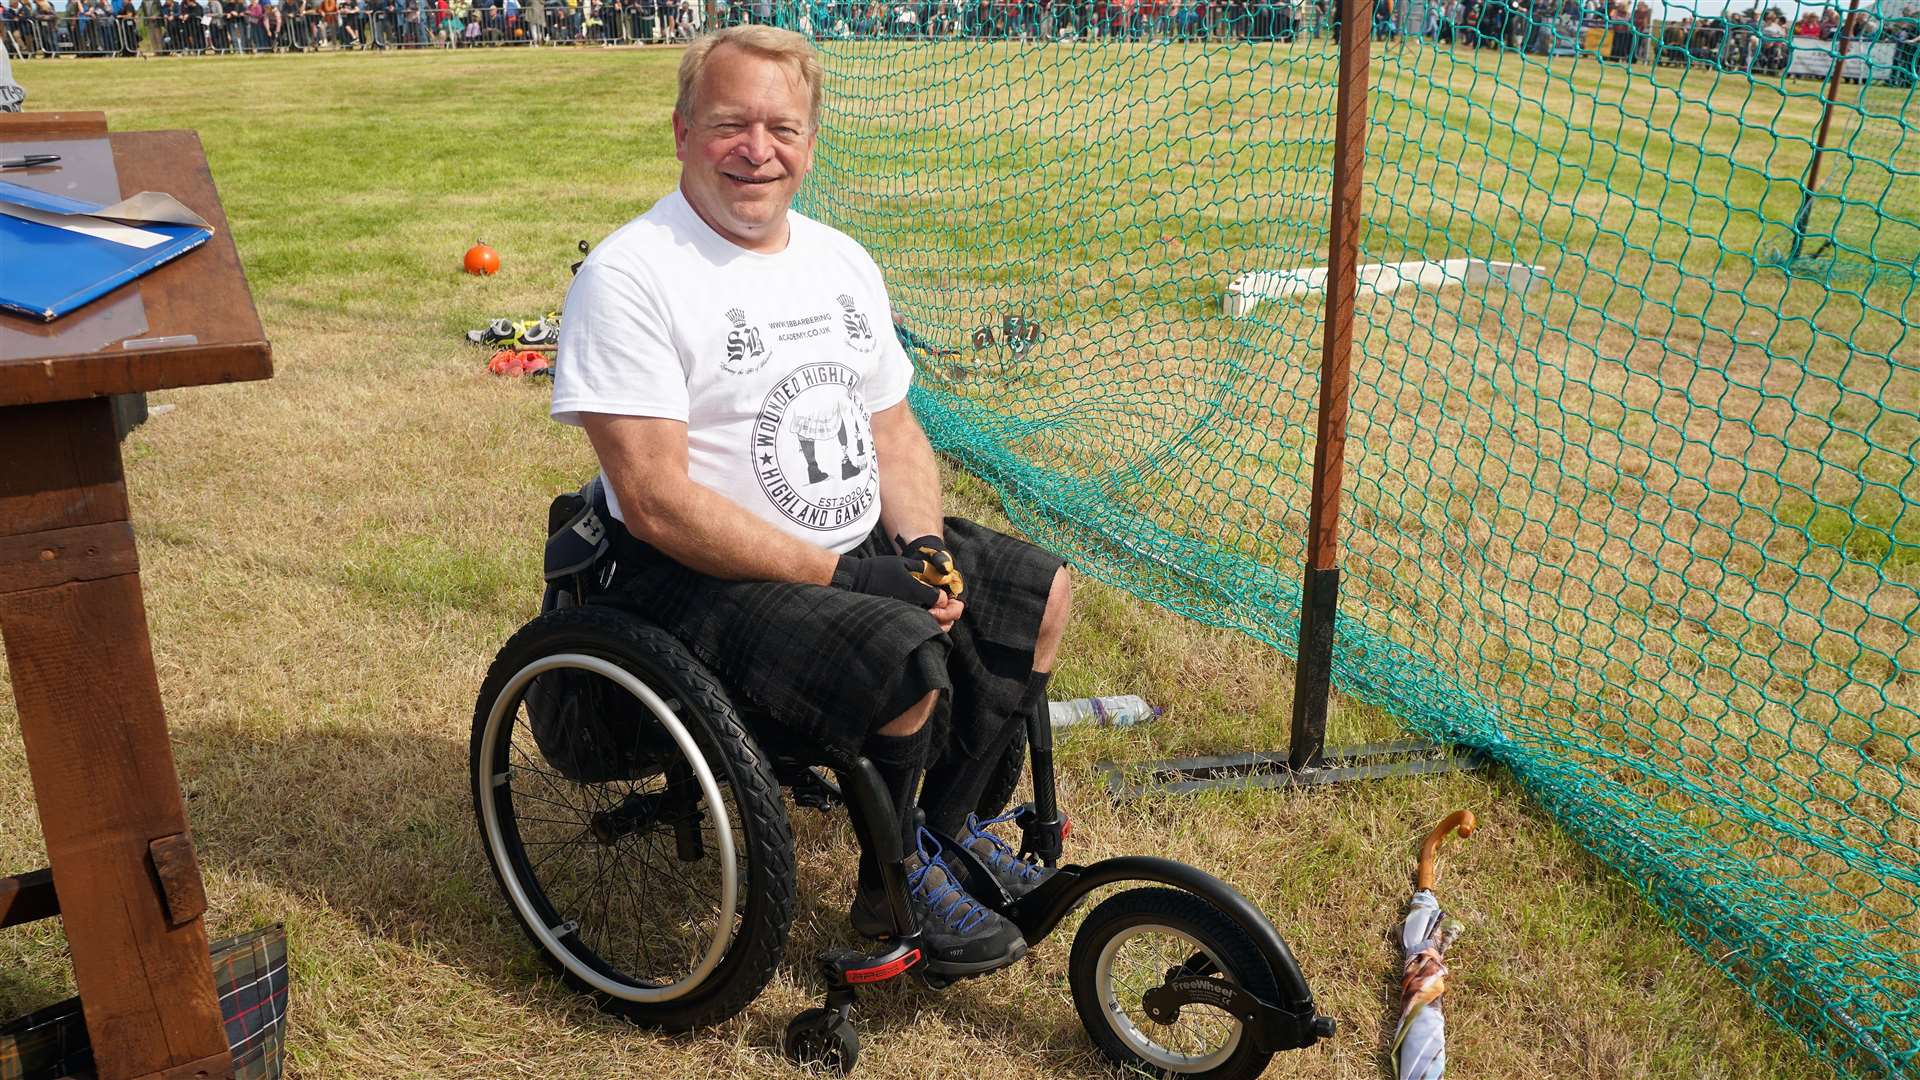 Davie Dent MBE, who was wounded by a surface-to-air-missile in Bosnia in the 1990s, beat his shot put world record by an inch at the event. Picture: DGS